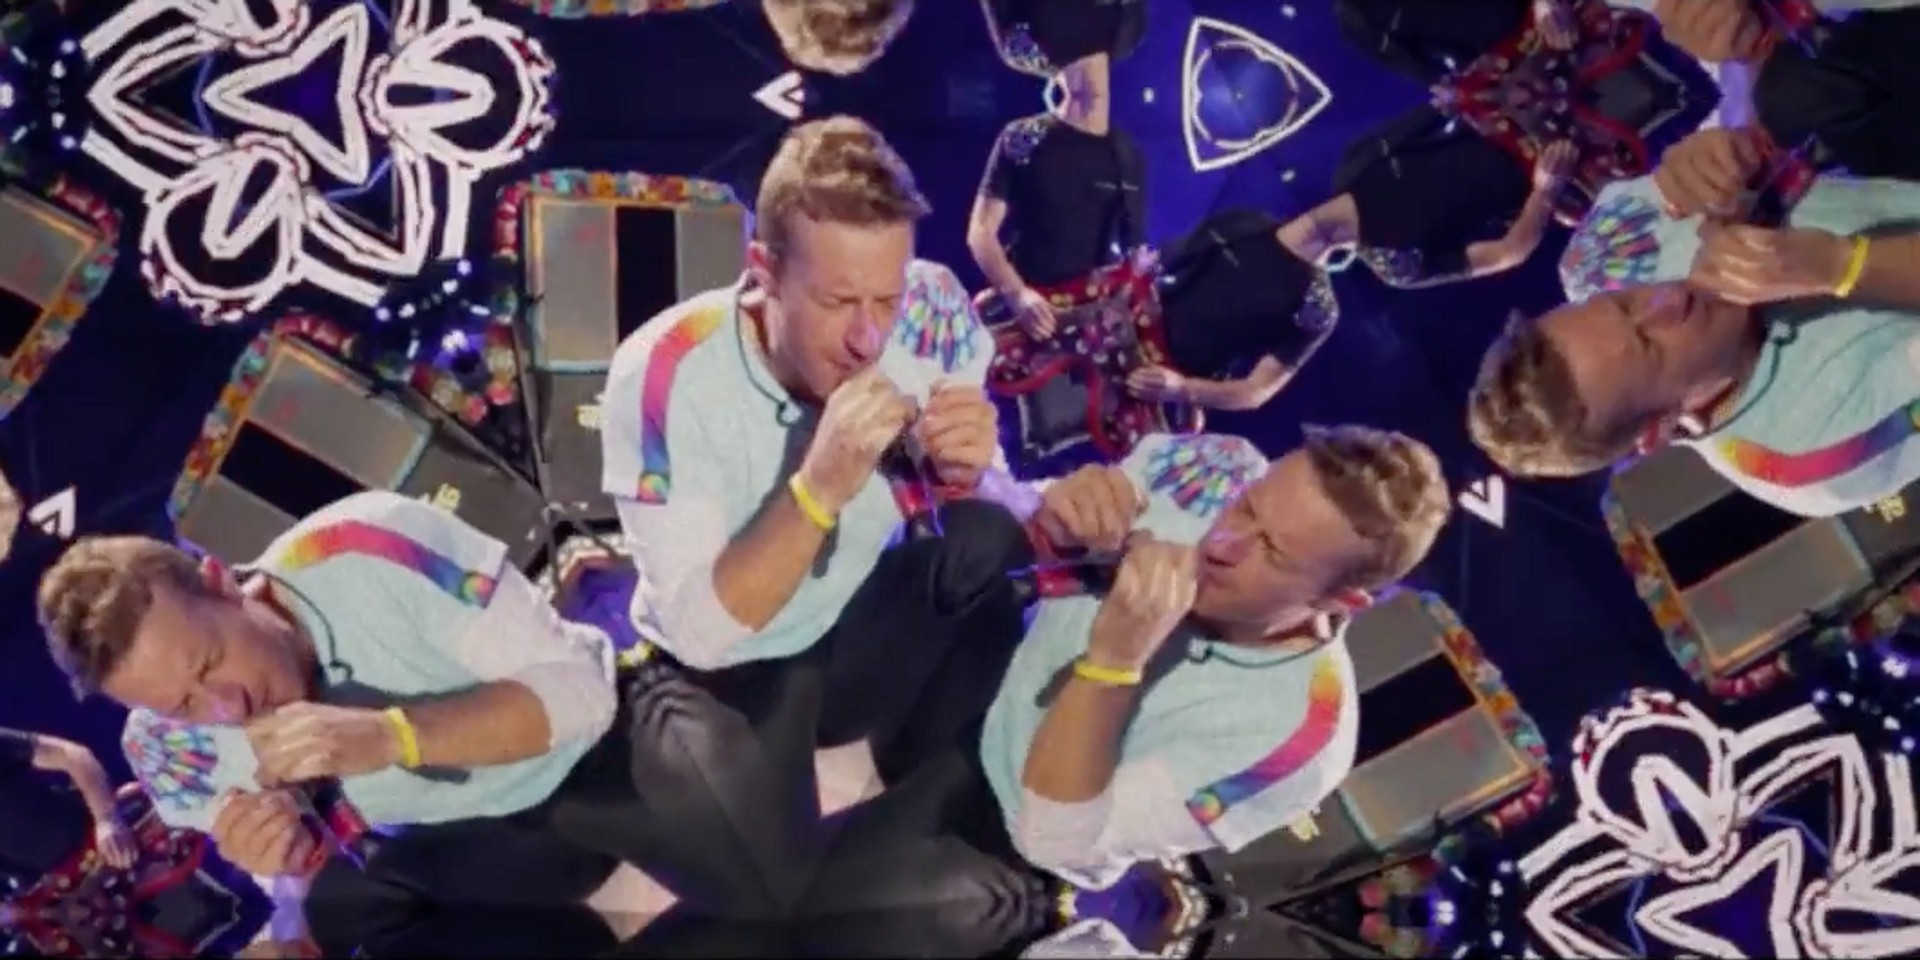 Coldplay and The Chainsmokers release Tokyo remix for "Something Just Like This" – watch